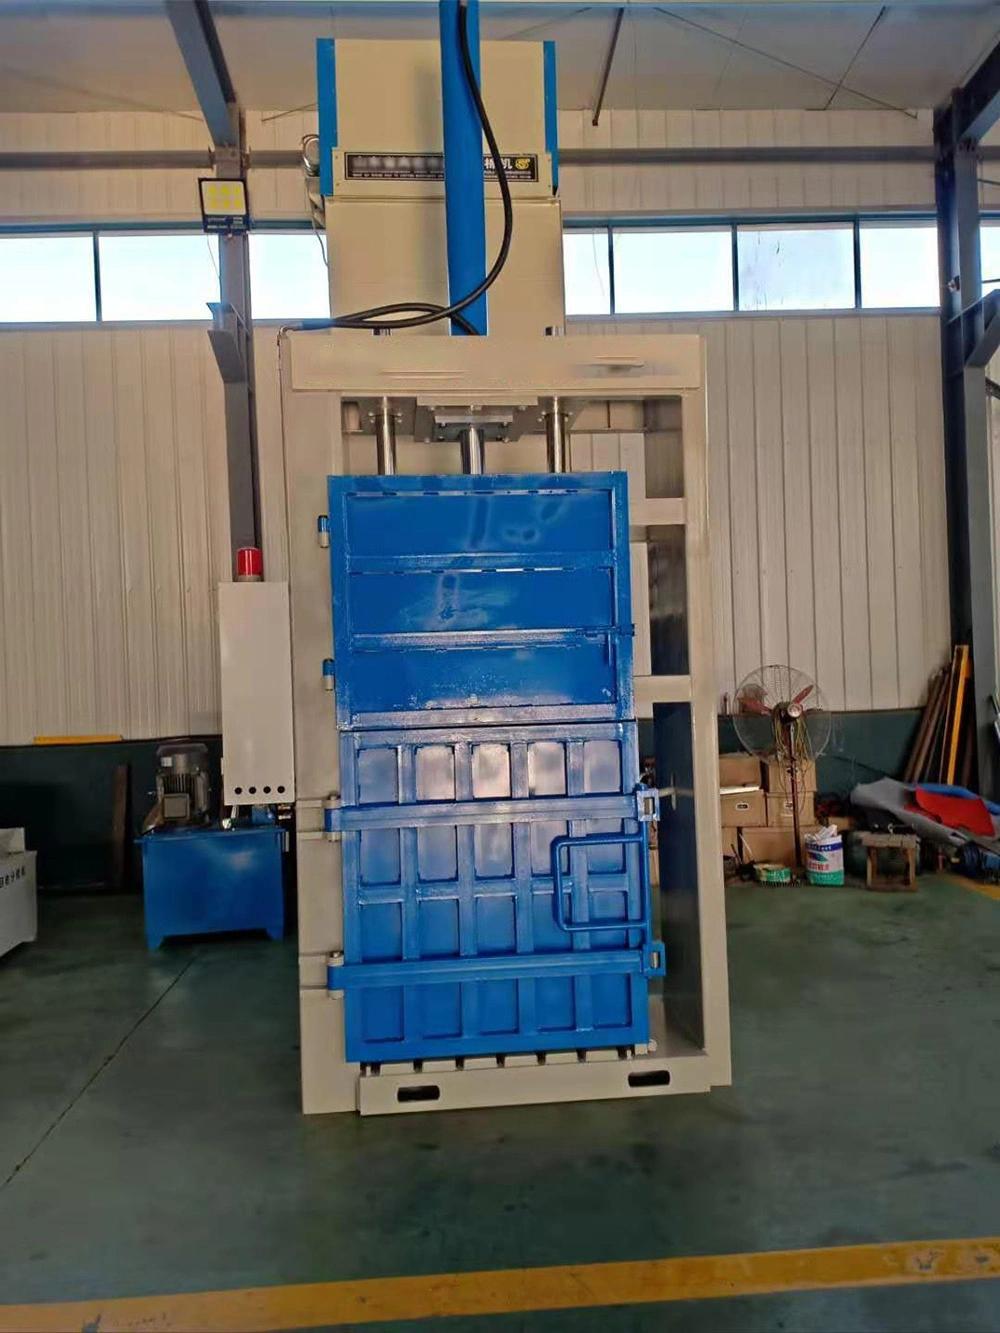 Medium-Sized Vertical Waste Paper Baler Hydraulic Press for Packaging Cartons/Corrugated Cartons/Plastic Film/Blister Film/Paper Recycling